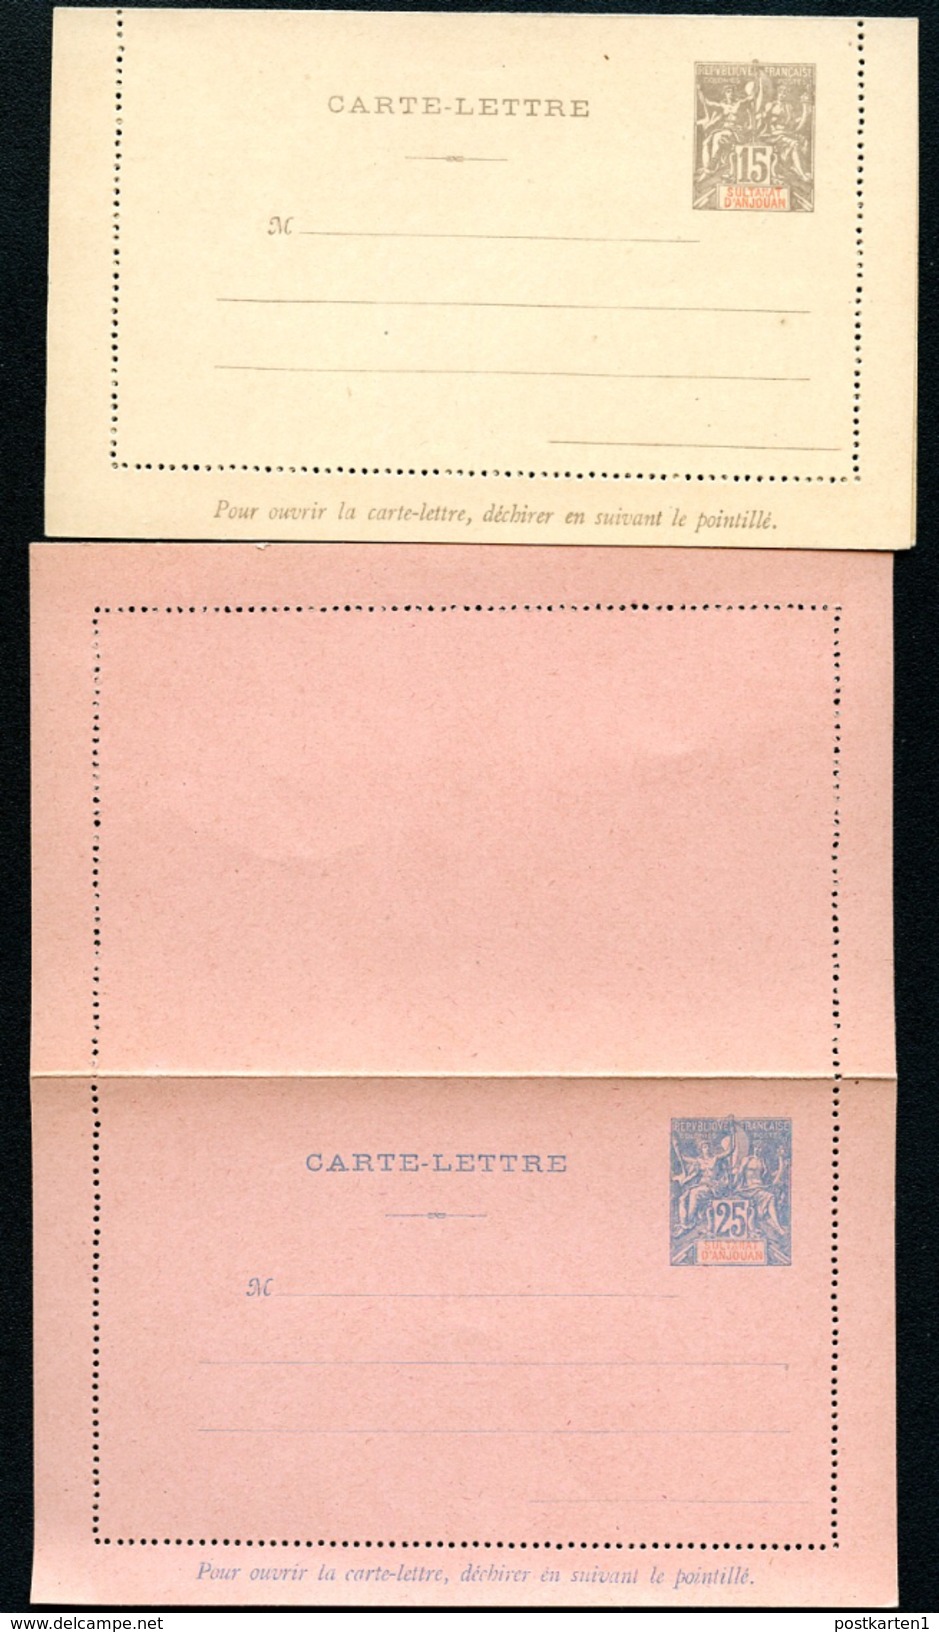 ANJOUAN COMOROS Letter Cards #5-6  15+25 C. Mint 1901 - Covers & Documents